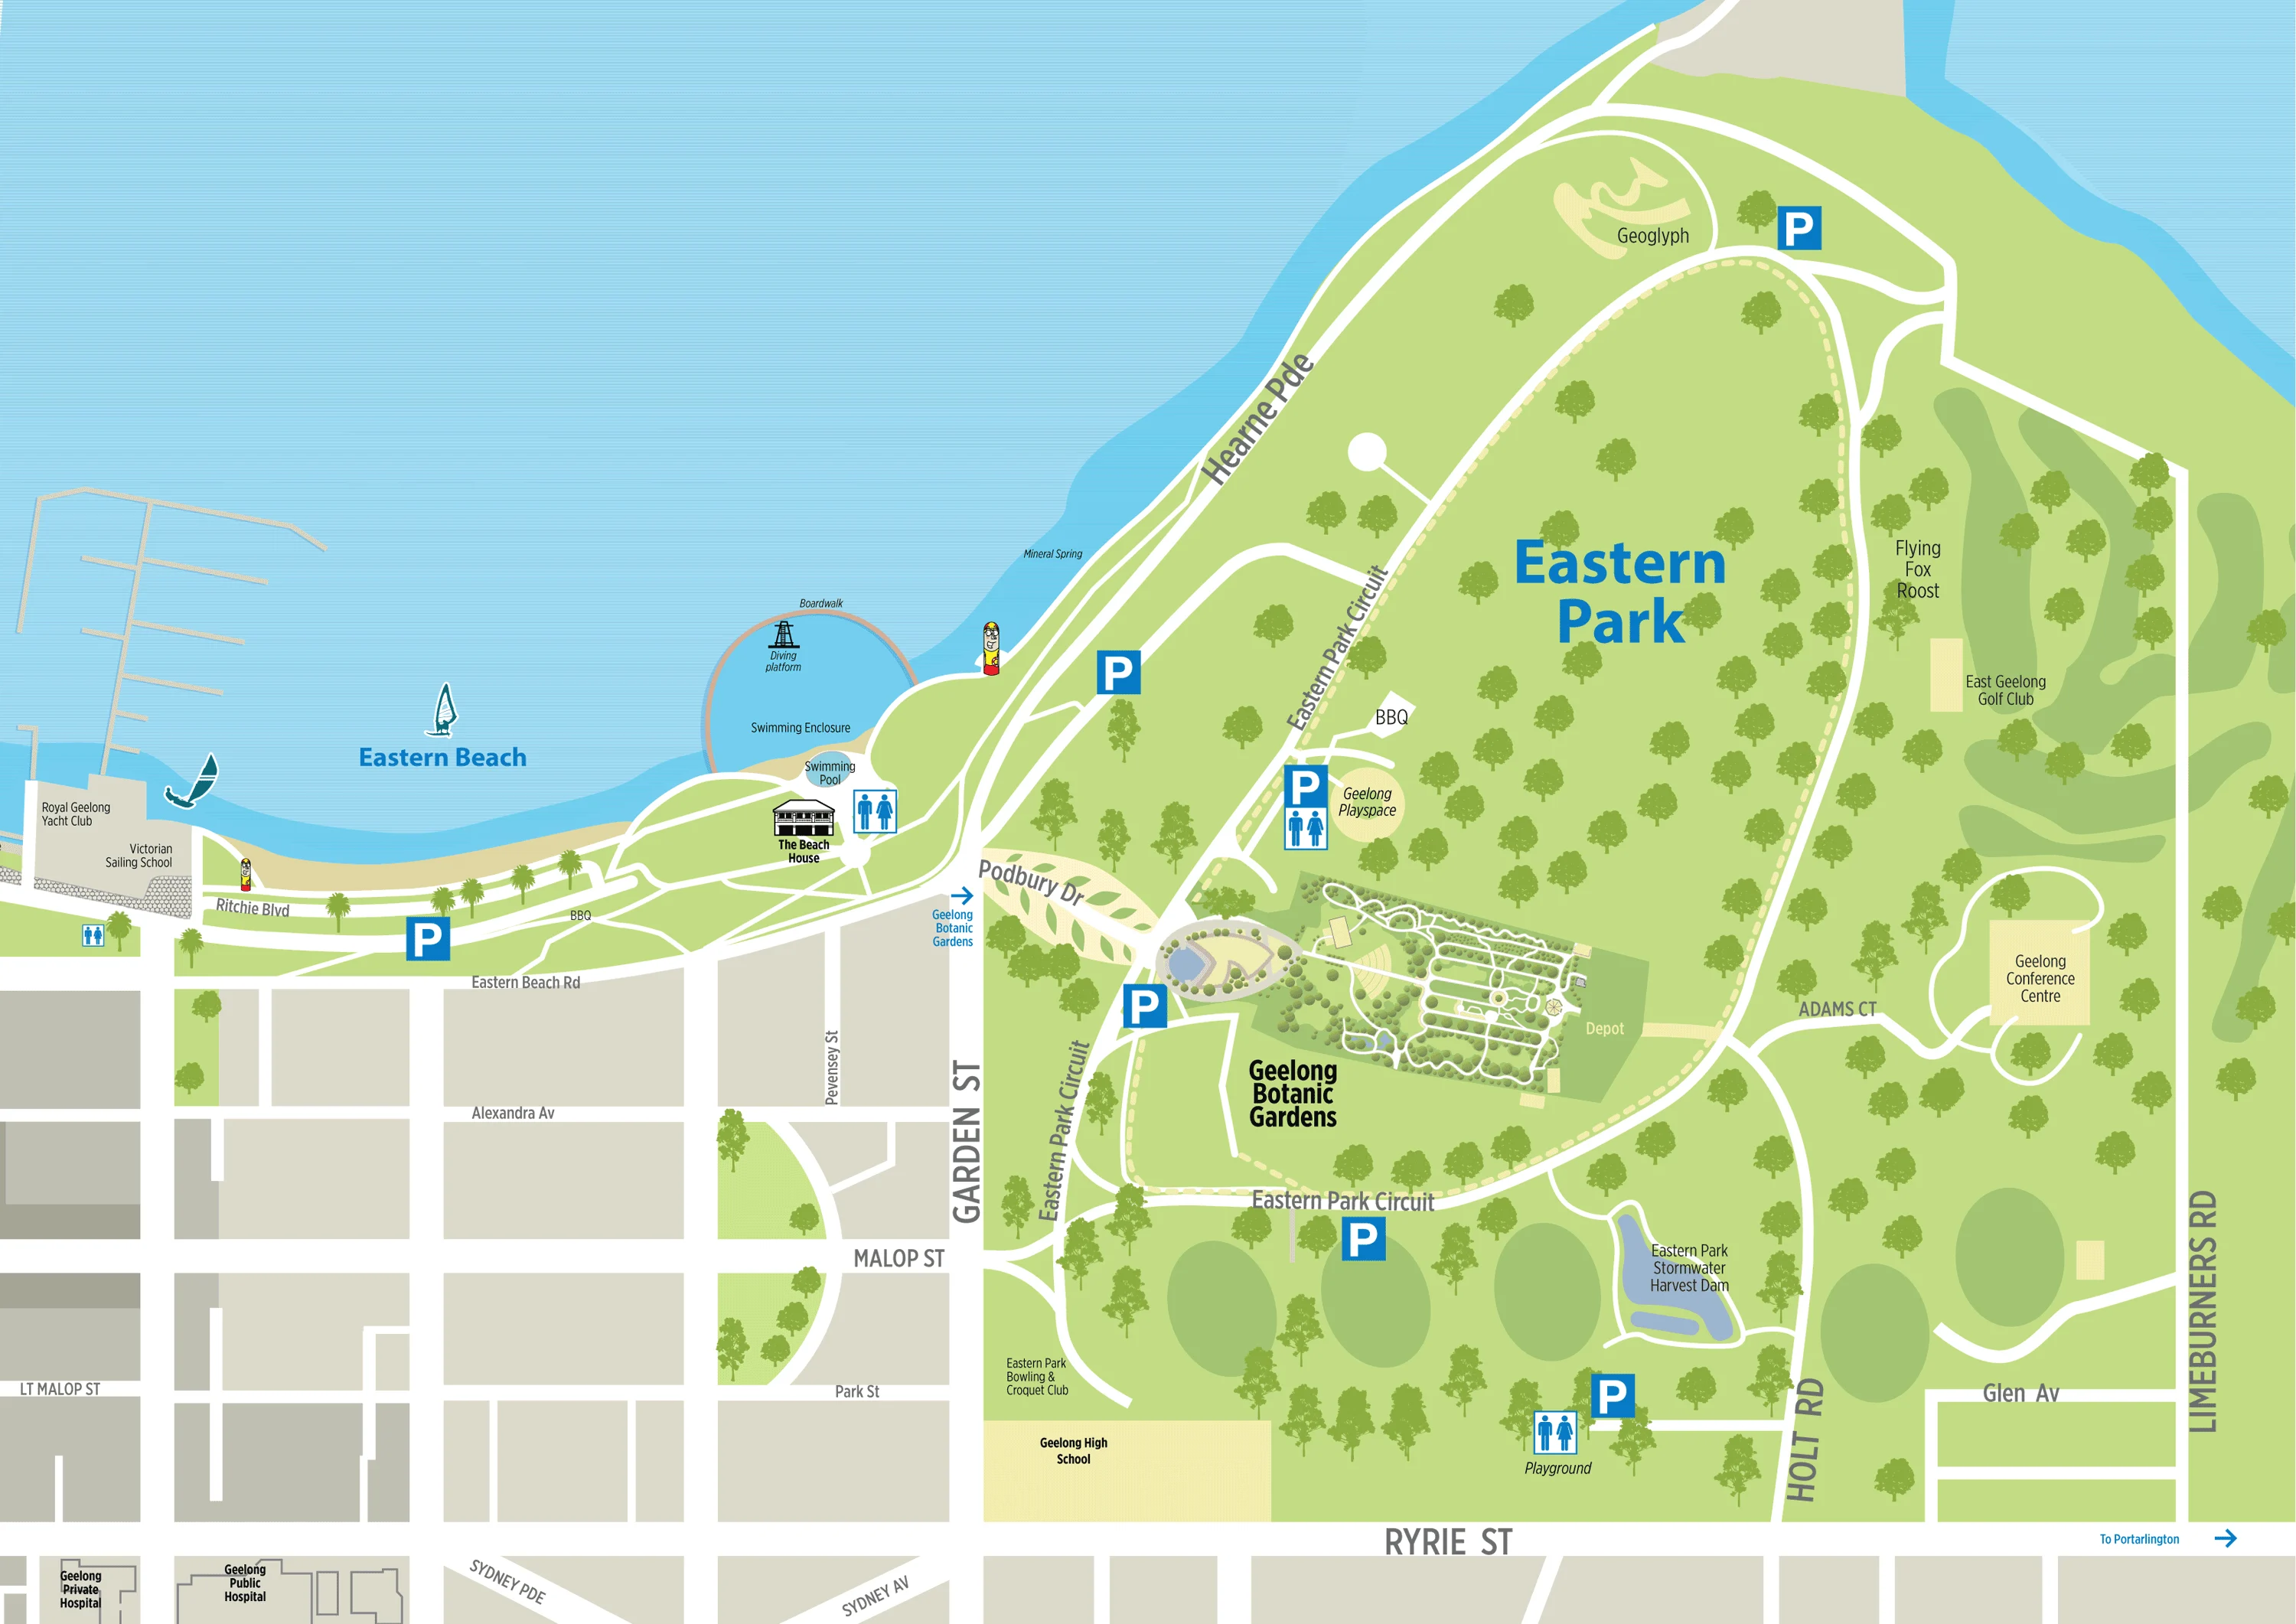 A map of Eastern Park highlighting the location of the Geelong Botanic Gardens.